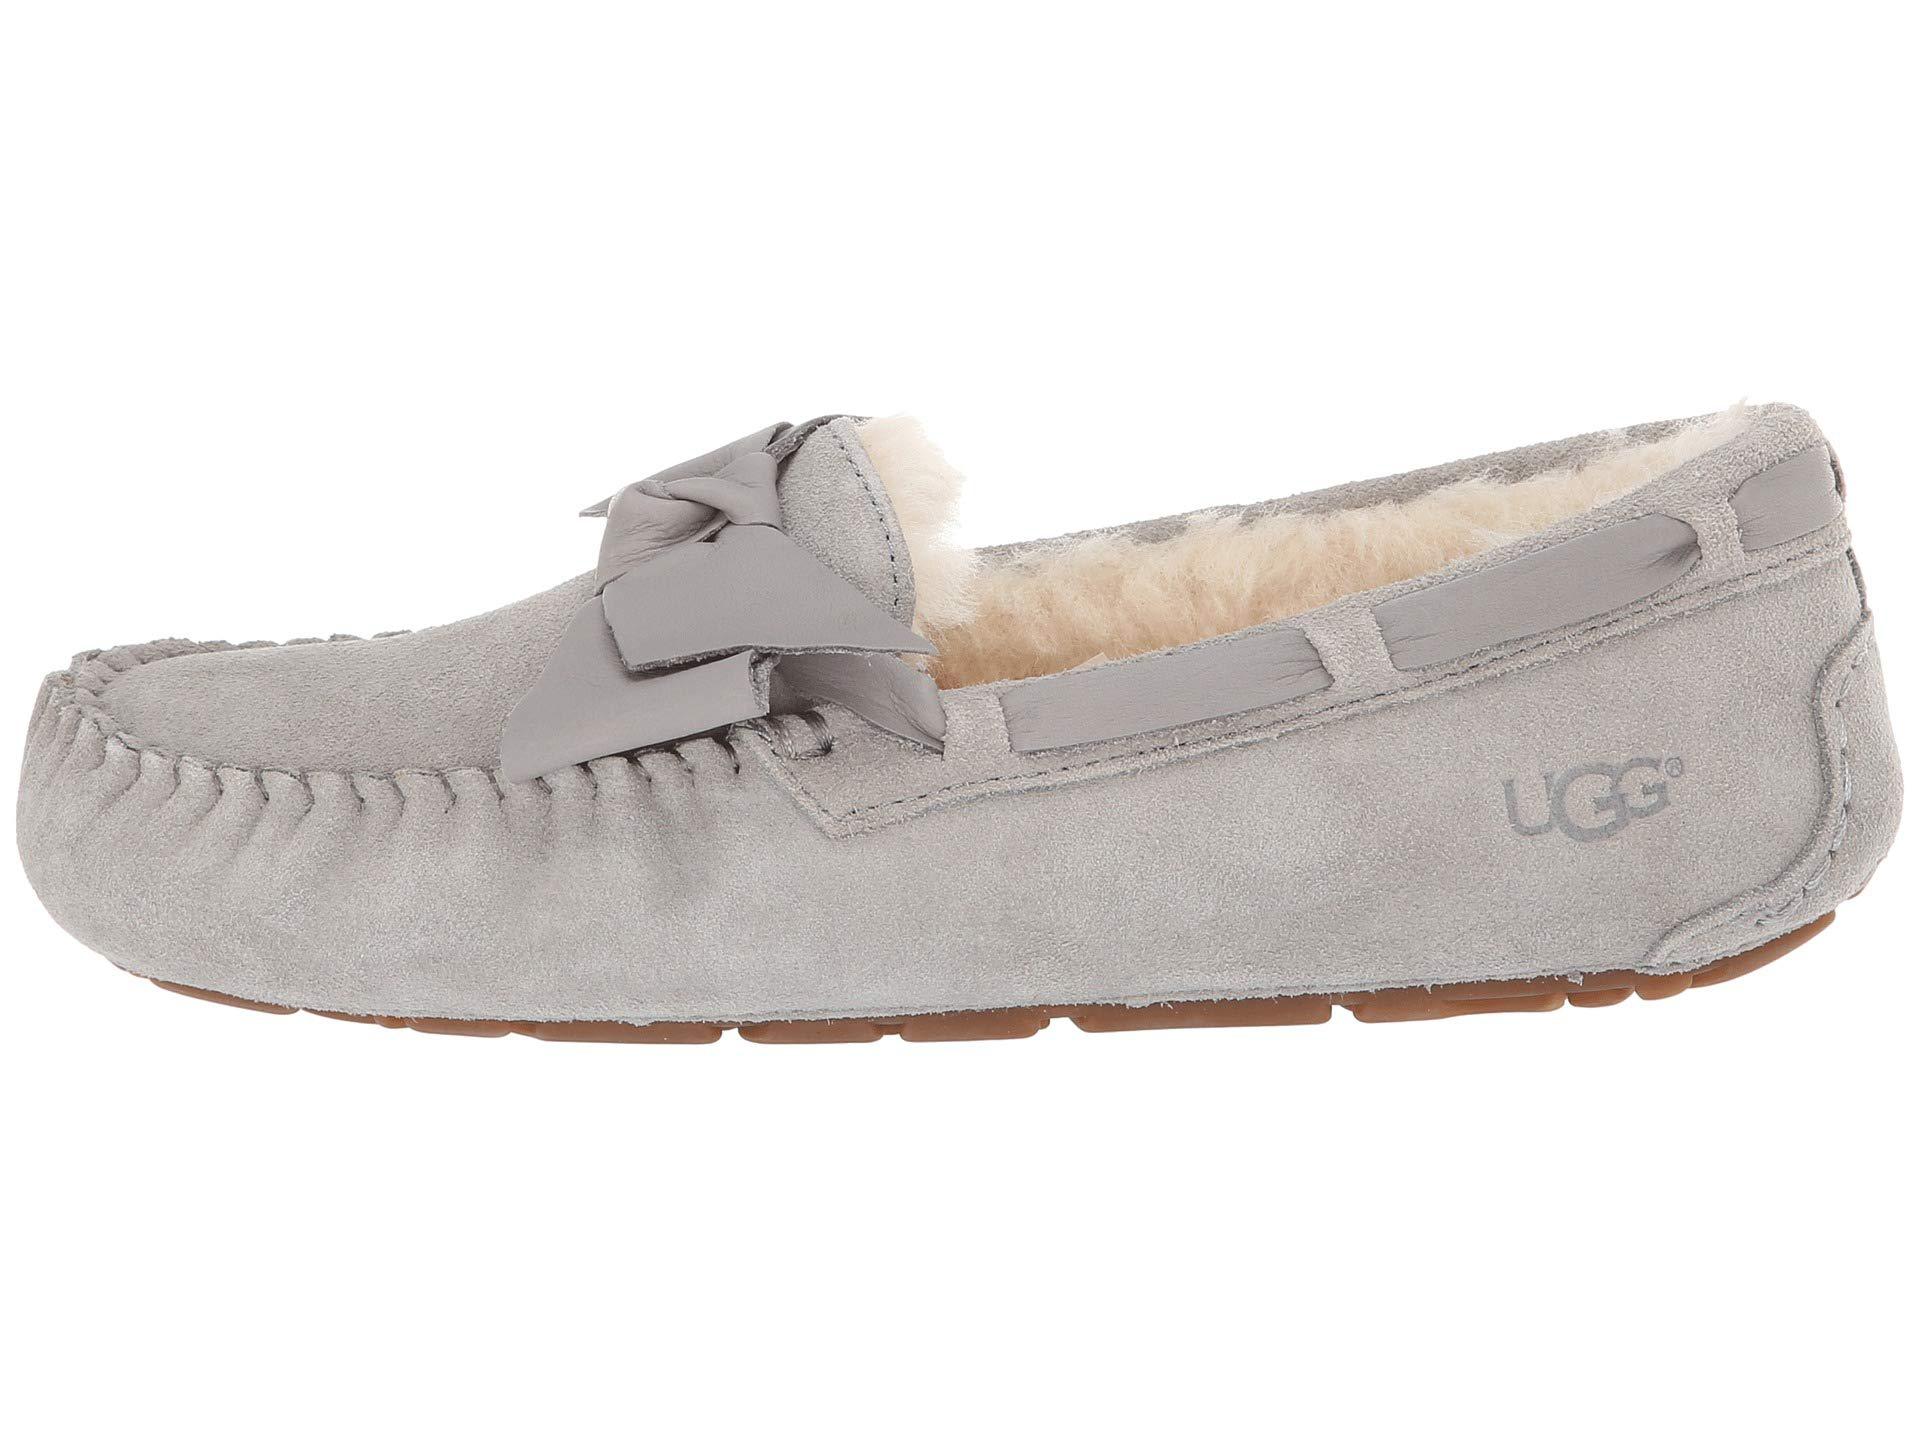 ugg moccasins with bow